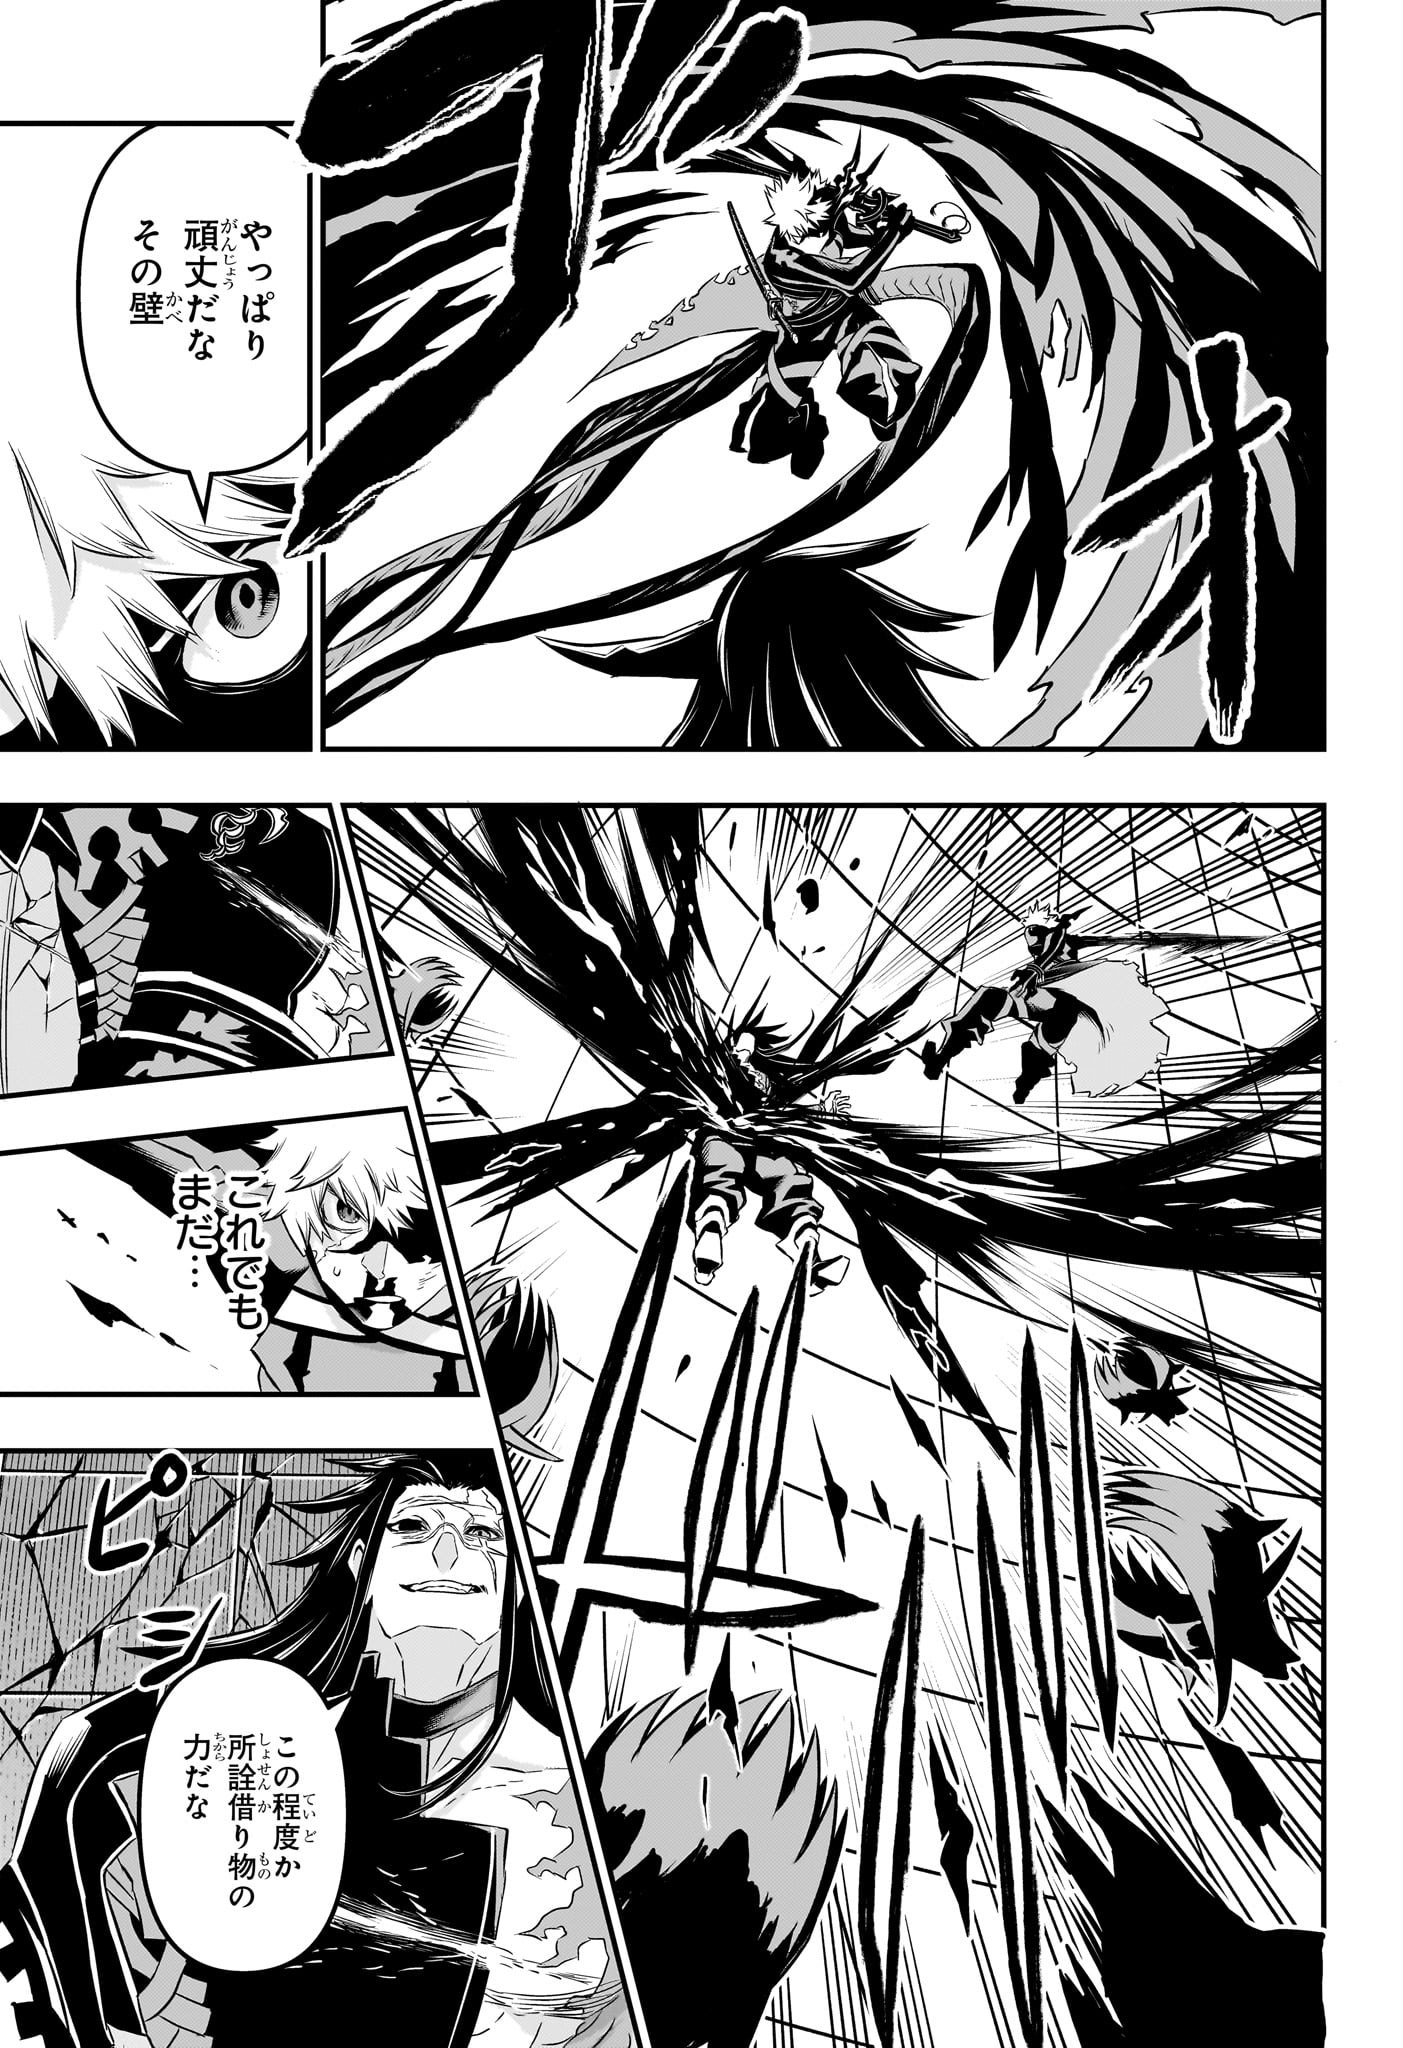 Nue no Onmyouji - Chapter 55 - Page 15